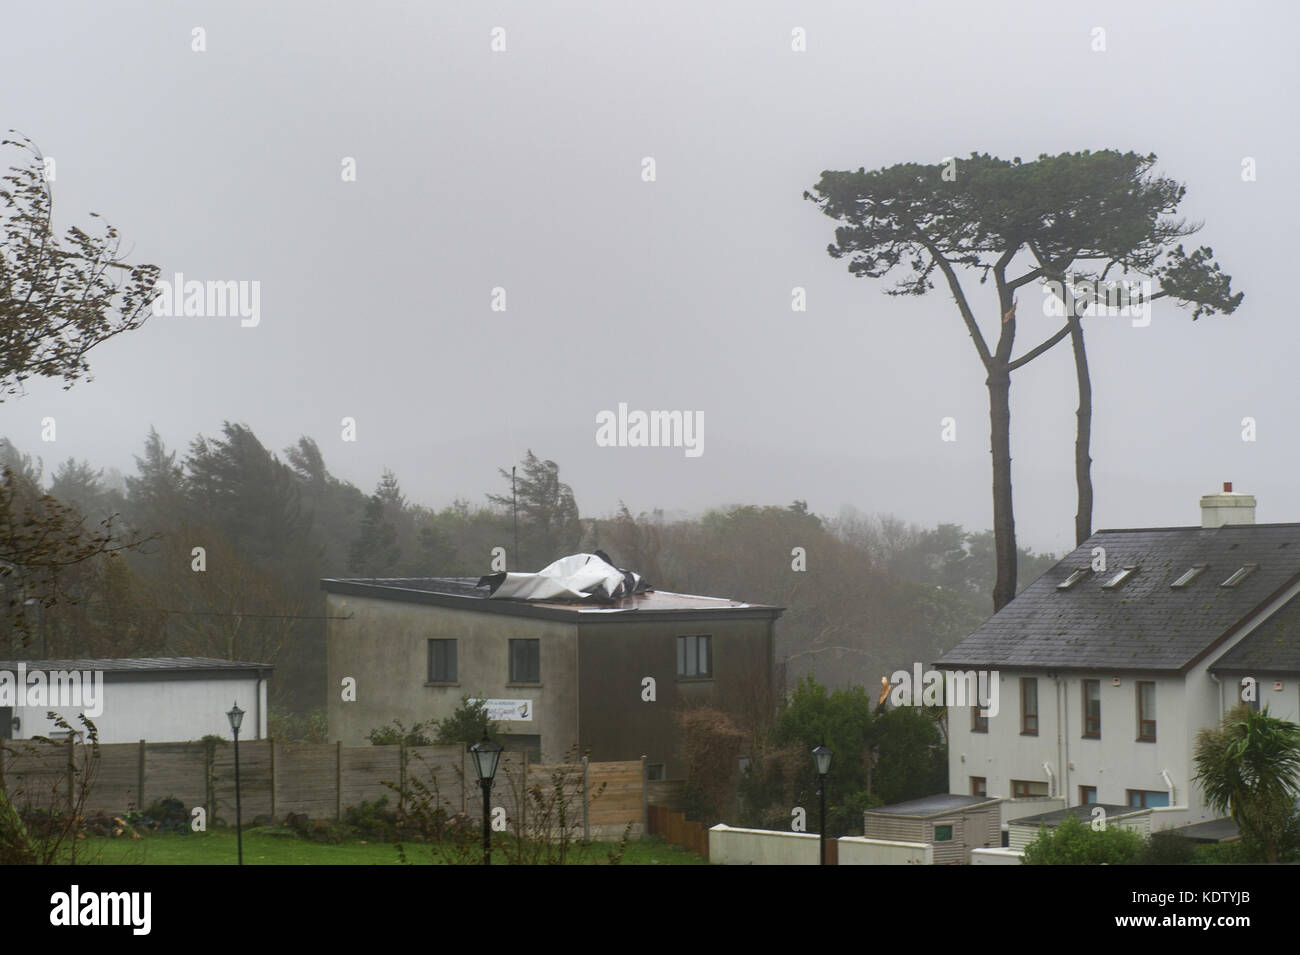 Schull, Ireland. 16th Oct, 2017. UK Weather.  Ex-Hurricane Ophelia hits Schull, Ireland with winds of 80kmh and gusts of 130kmh.  Major structural damage is expected as the worst is yet to come. The roof of the Schull Irish Coast Guard building is pictured partially blown off due to the high winds. Credit: Andy Gibson/Alamy Live News. Stock Photo